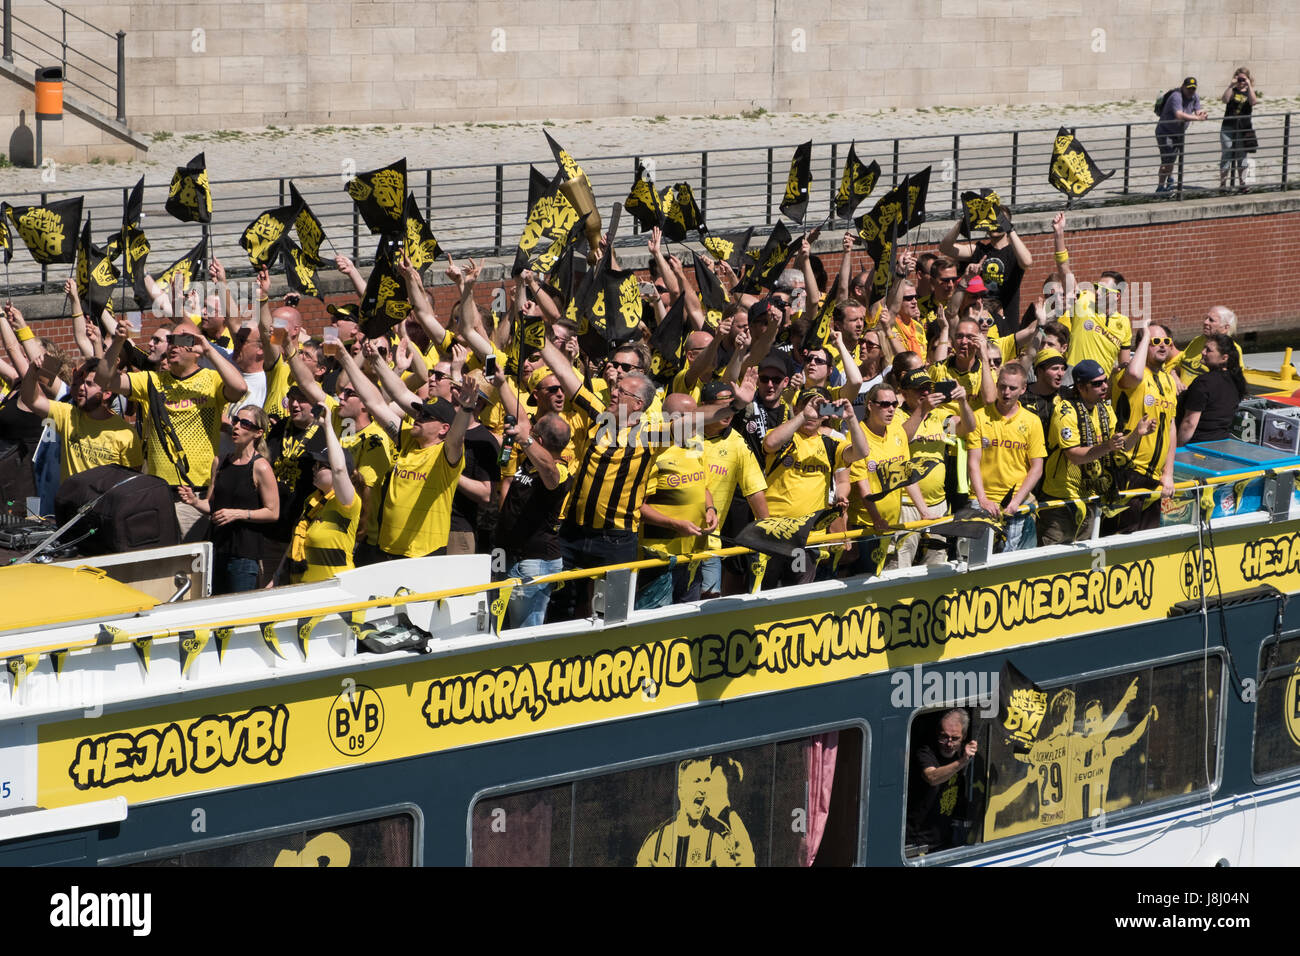 Berlin, Germany - may 27, 2017: German football fans of BVB Borussia Dortmund on boat on the day of the DFB-Pokal final in Berlin. Stock Photo